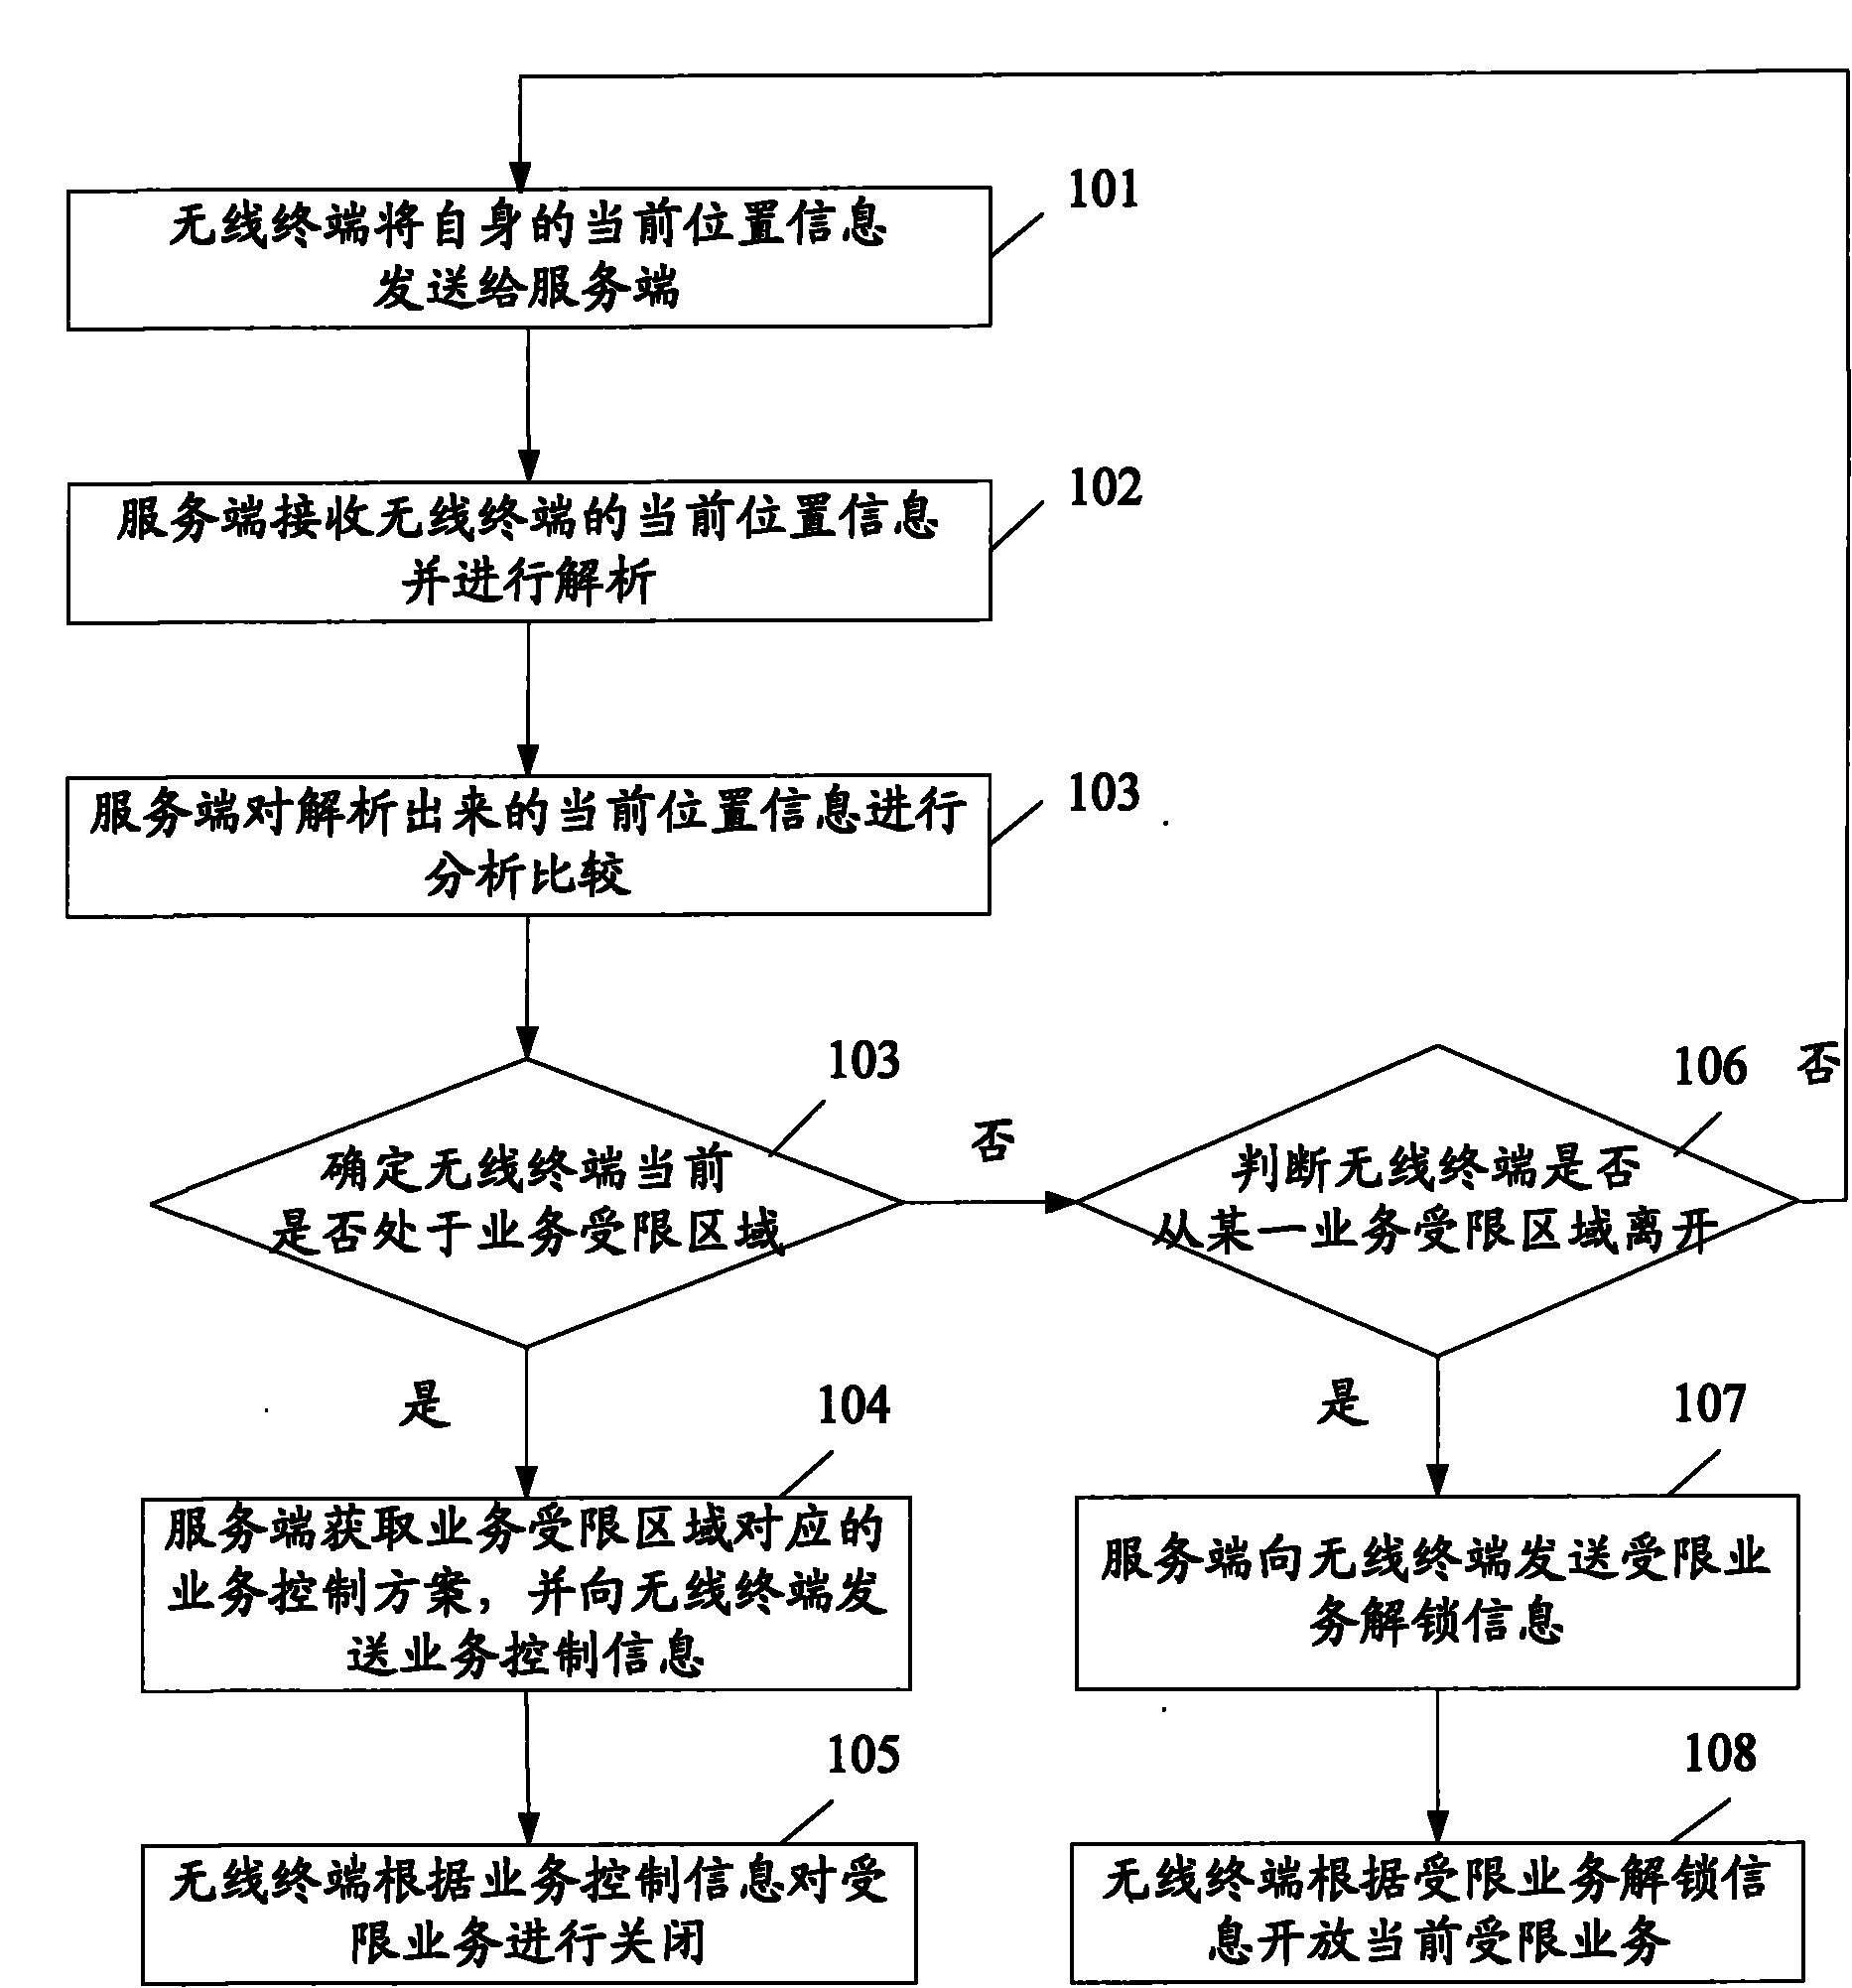 Method and system for controlling regional service